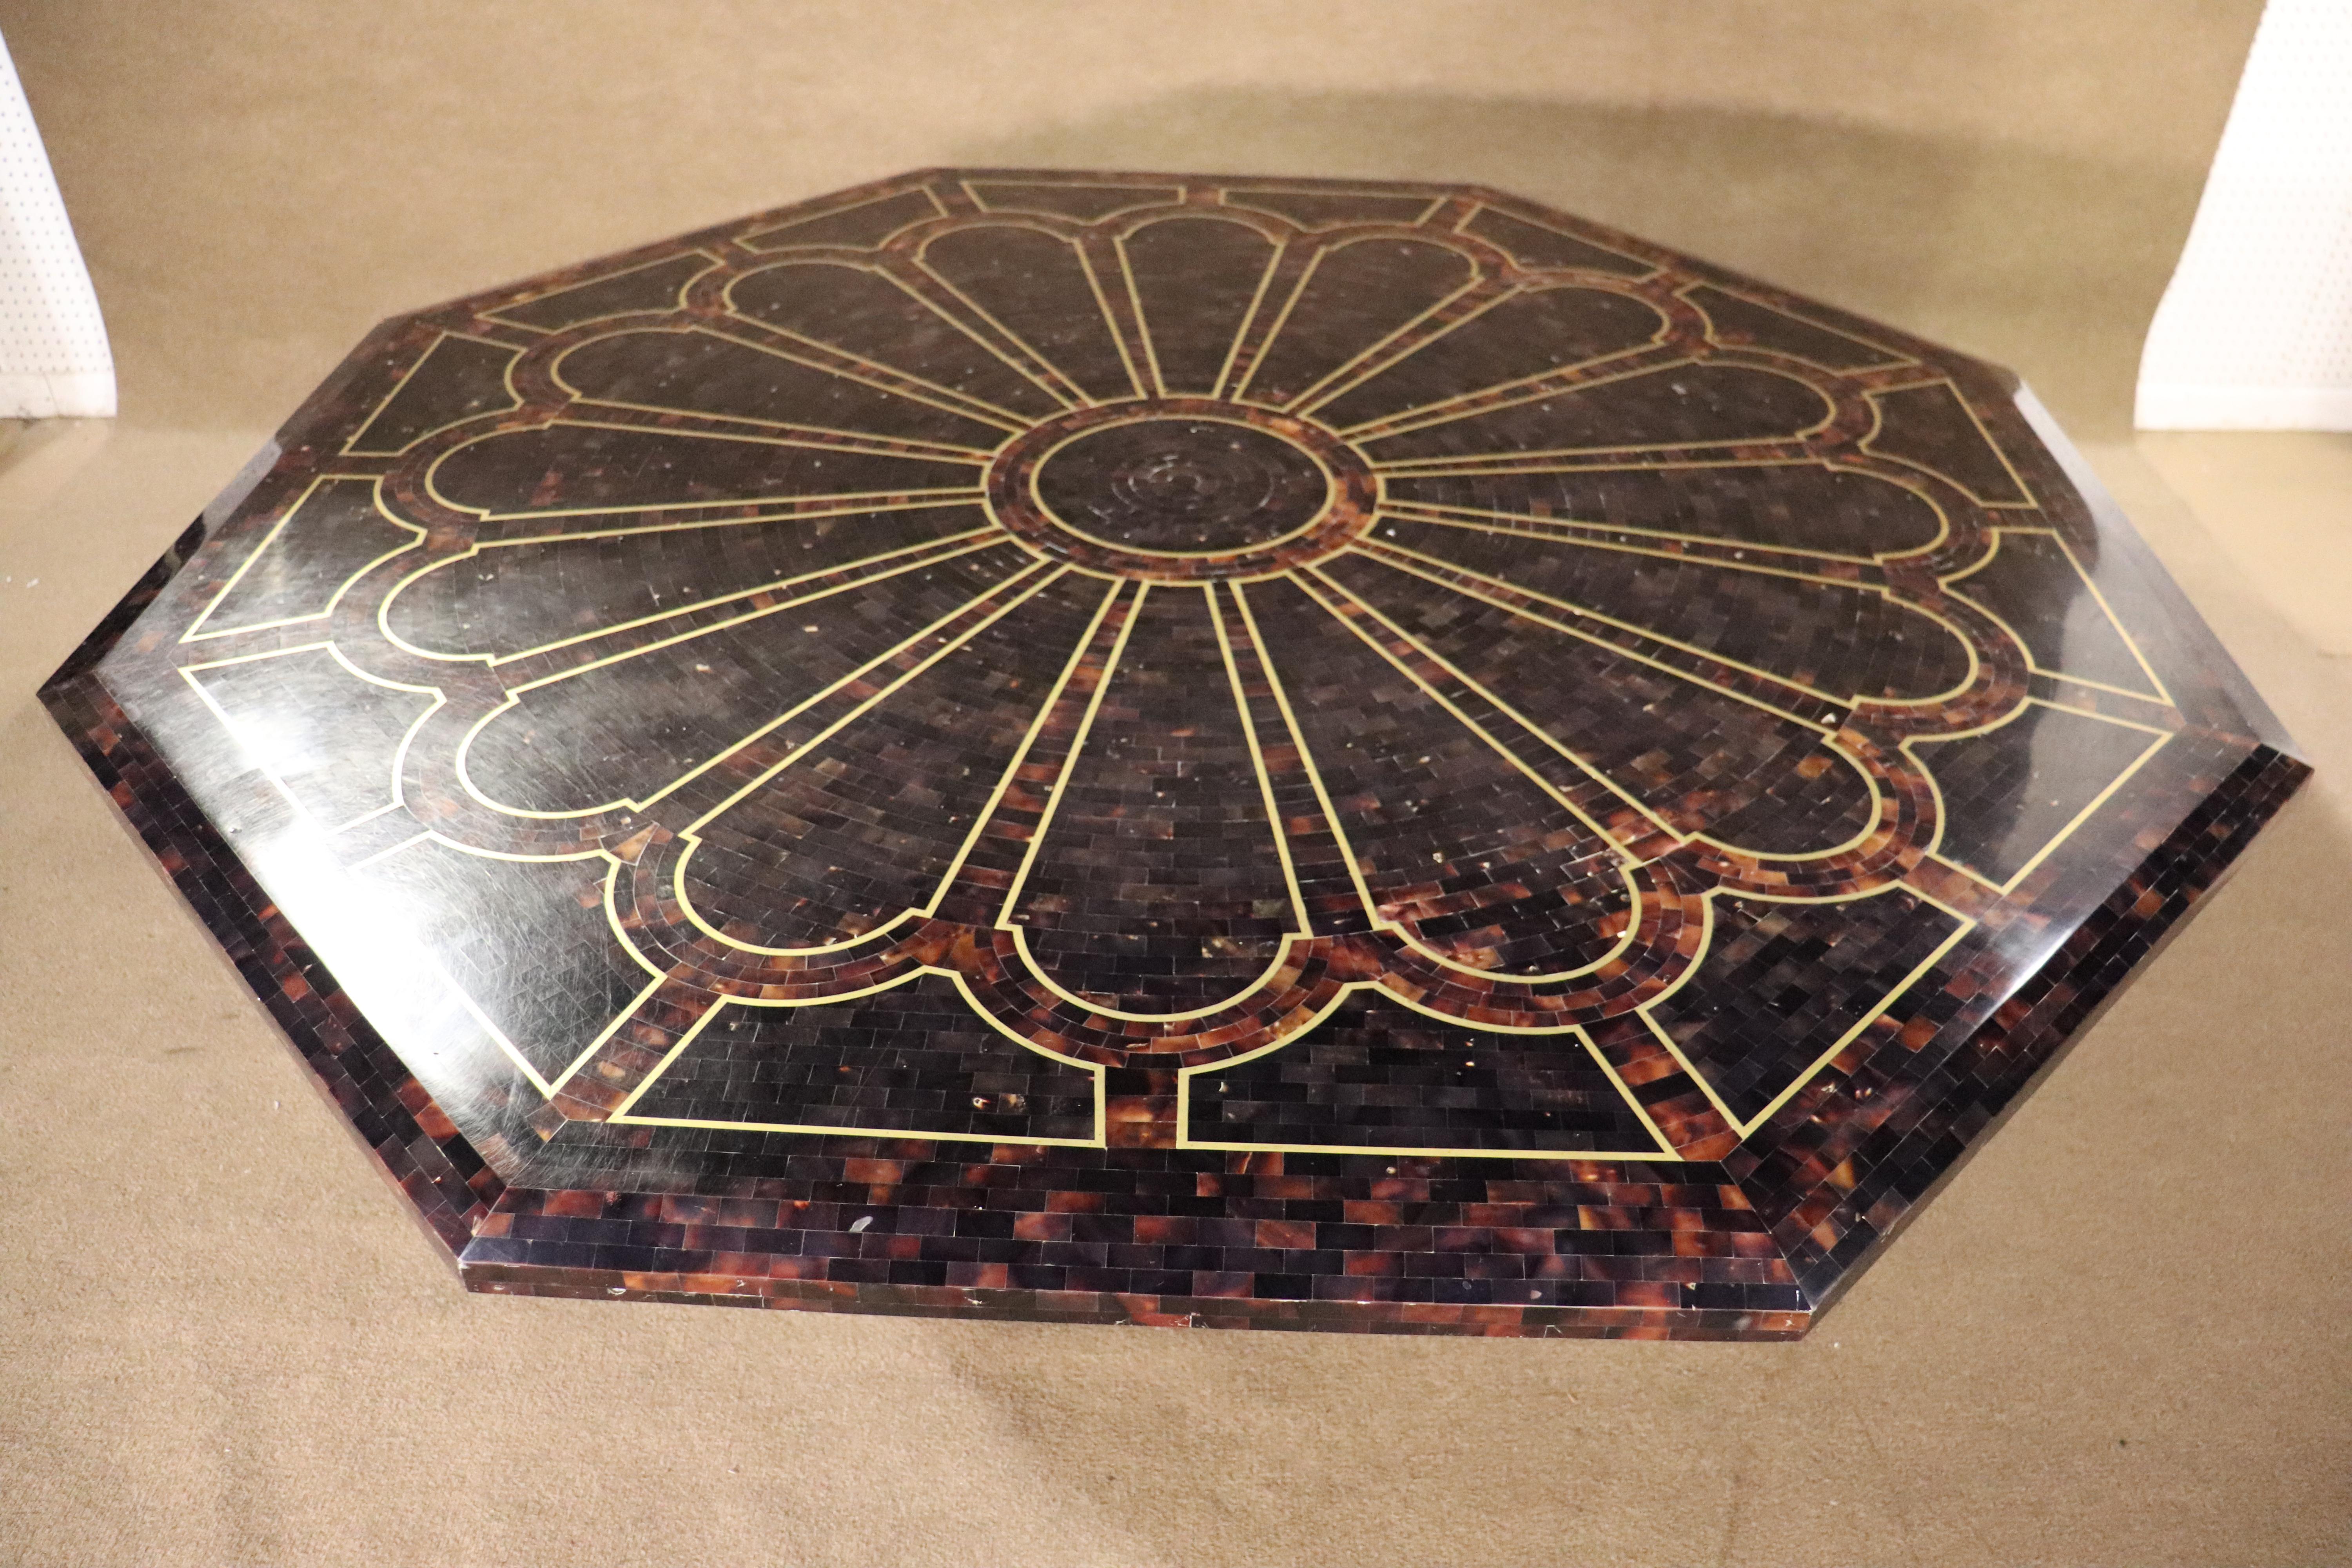 Large octagonal dining table in tessellated stone with brass inlay design. A stunning center piece for your dining room. This pedestal table is over five feet wide with designs on top and base.
Please confirm location NY or NJ